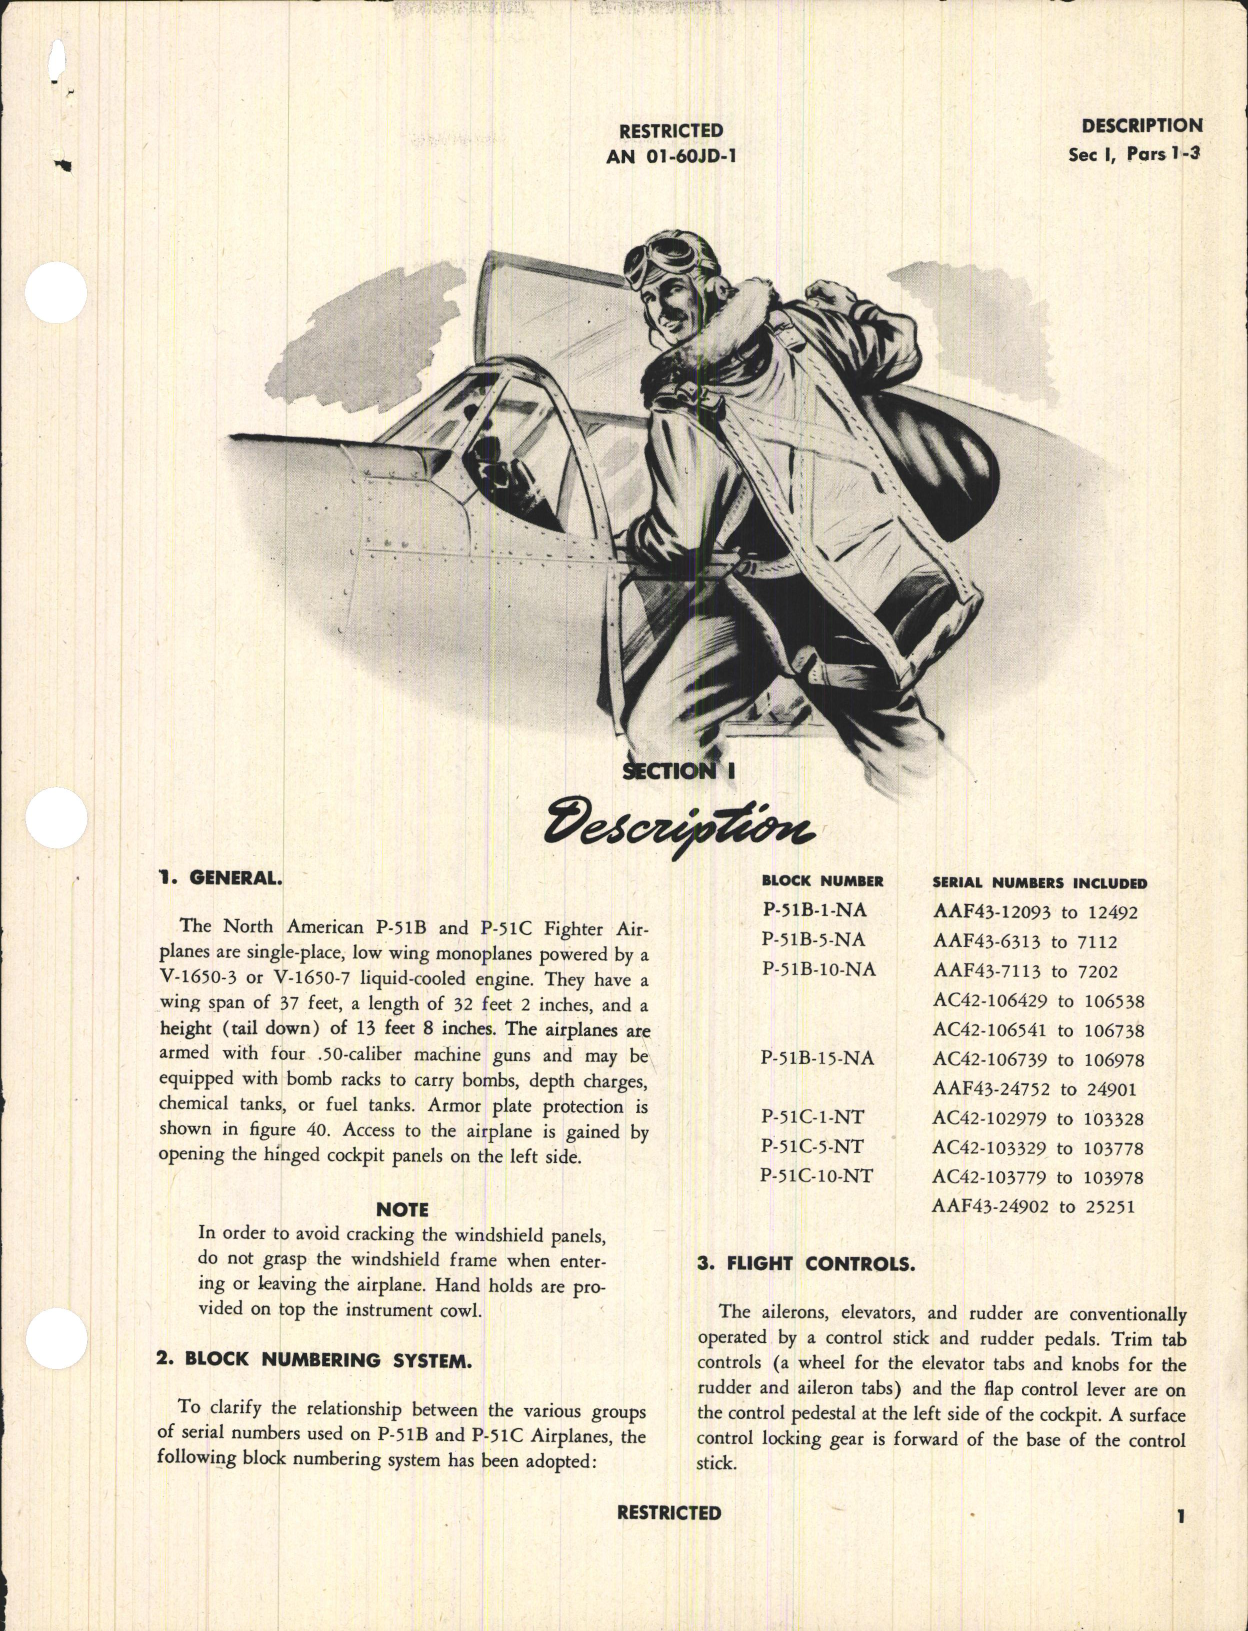 Sample page 5 from AirCorps Library document: Pilot's Flight Operating Instructions for P-51